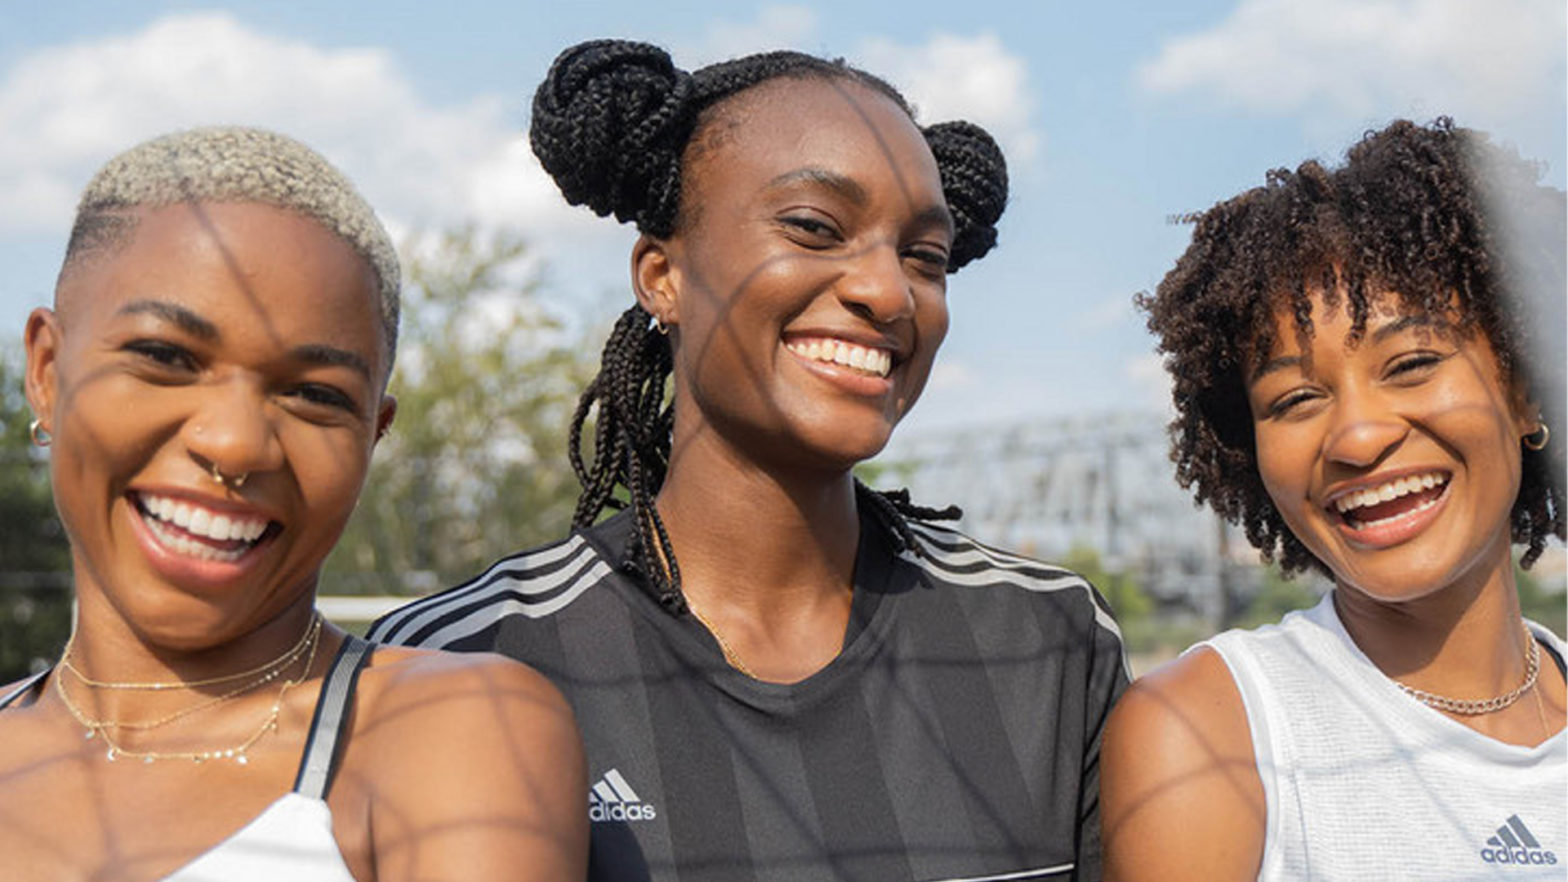 Adidas Teams Up With The Black Women's Player Collective To Break Barriers For Young Black Girls In Soccer